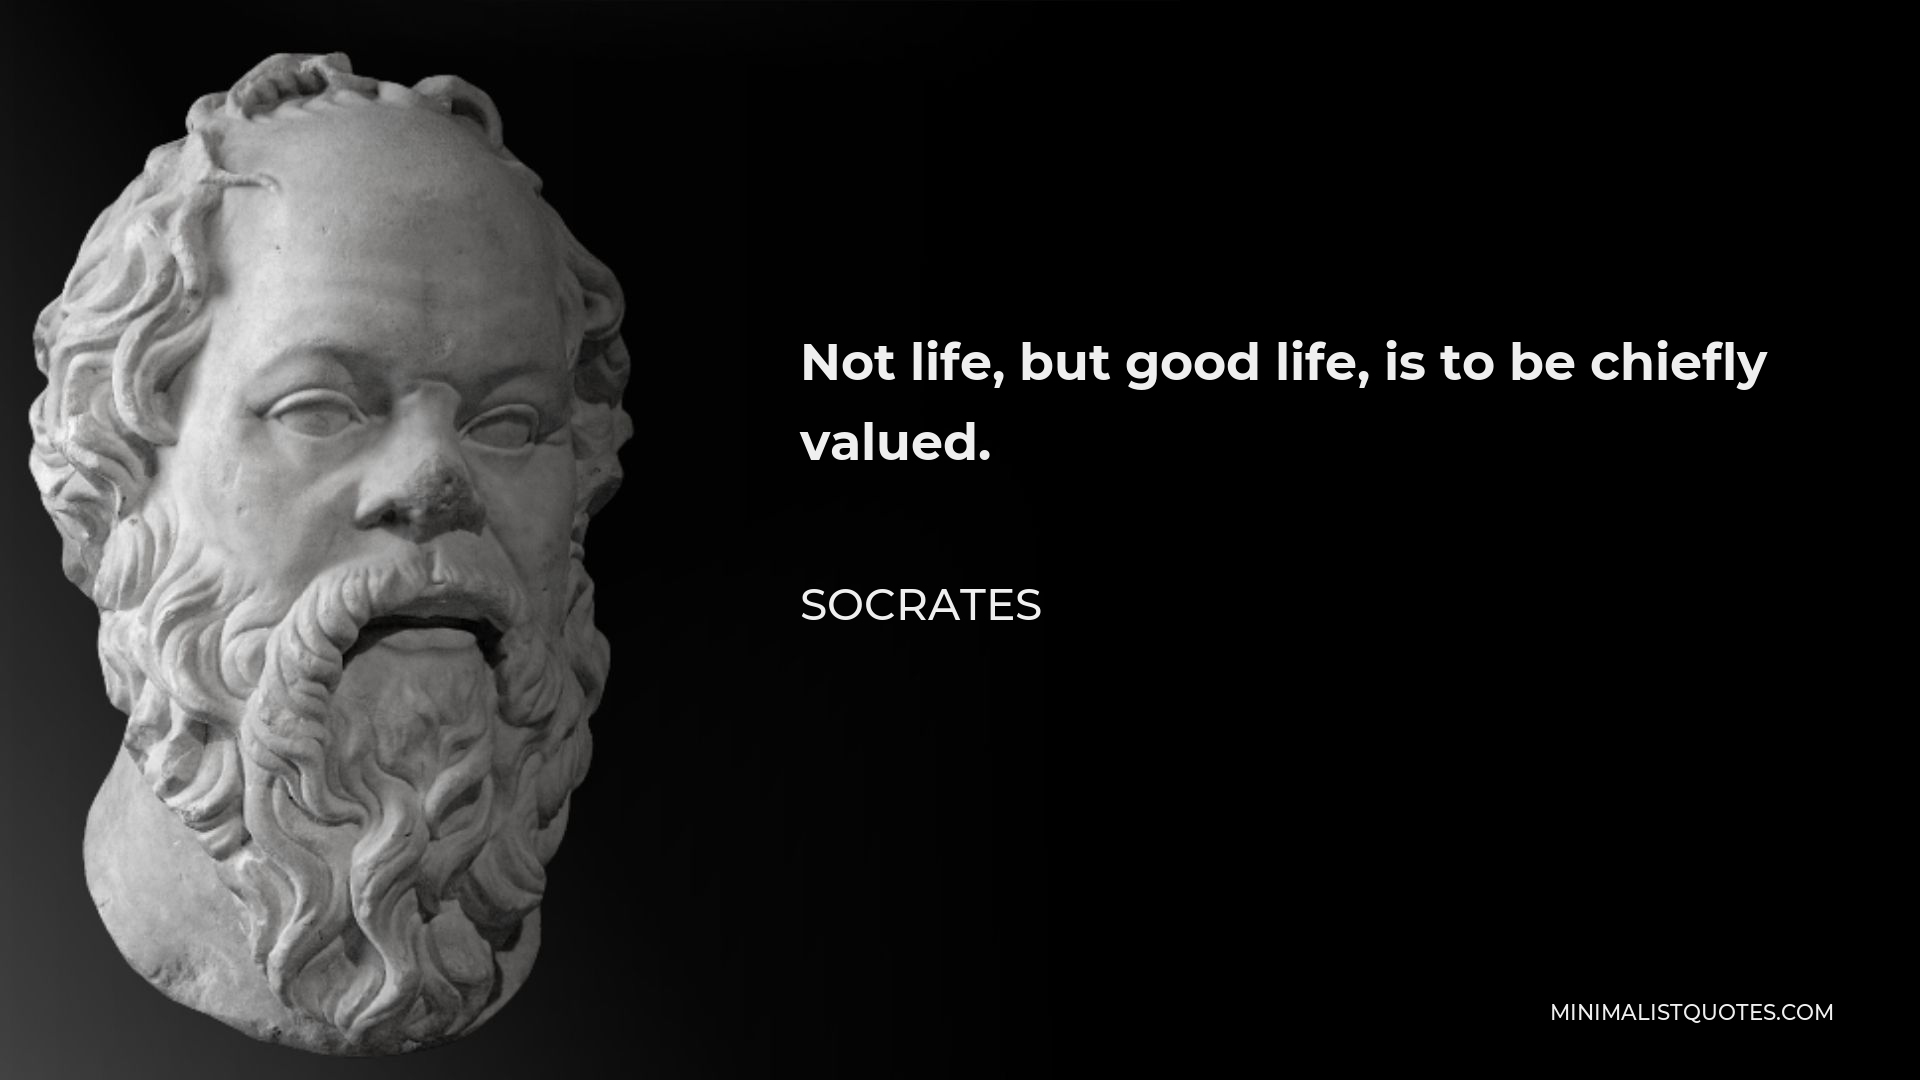 Socrates Quote - Not life, but good life, is to be chiefly valued.